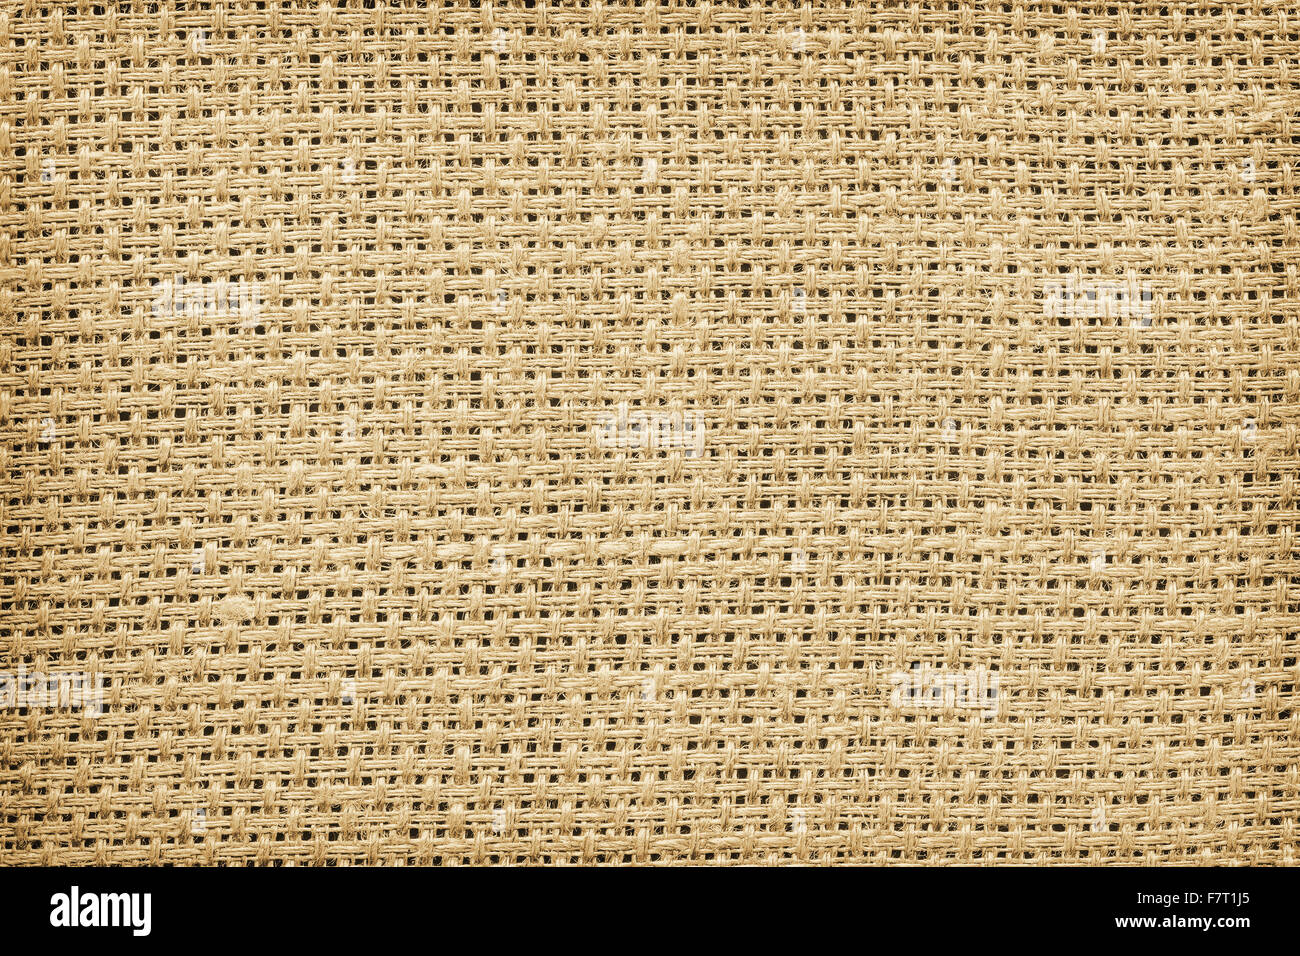 High quality linen texture or background. Stock Photo